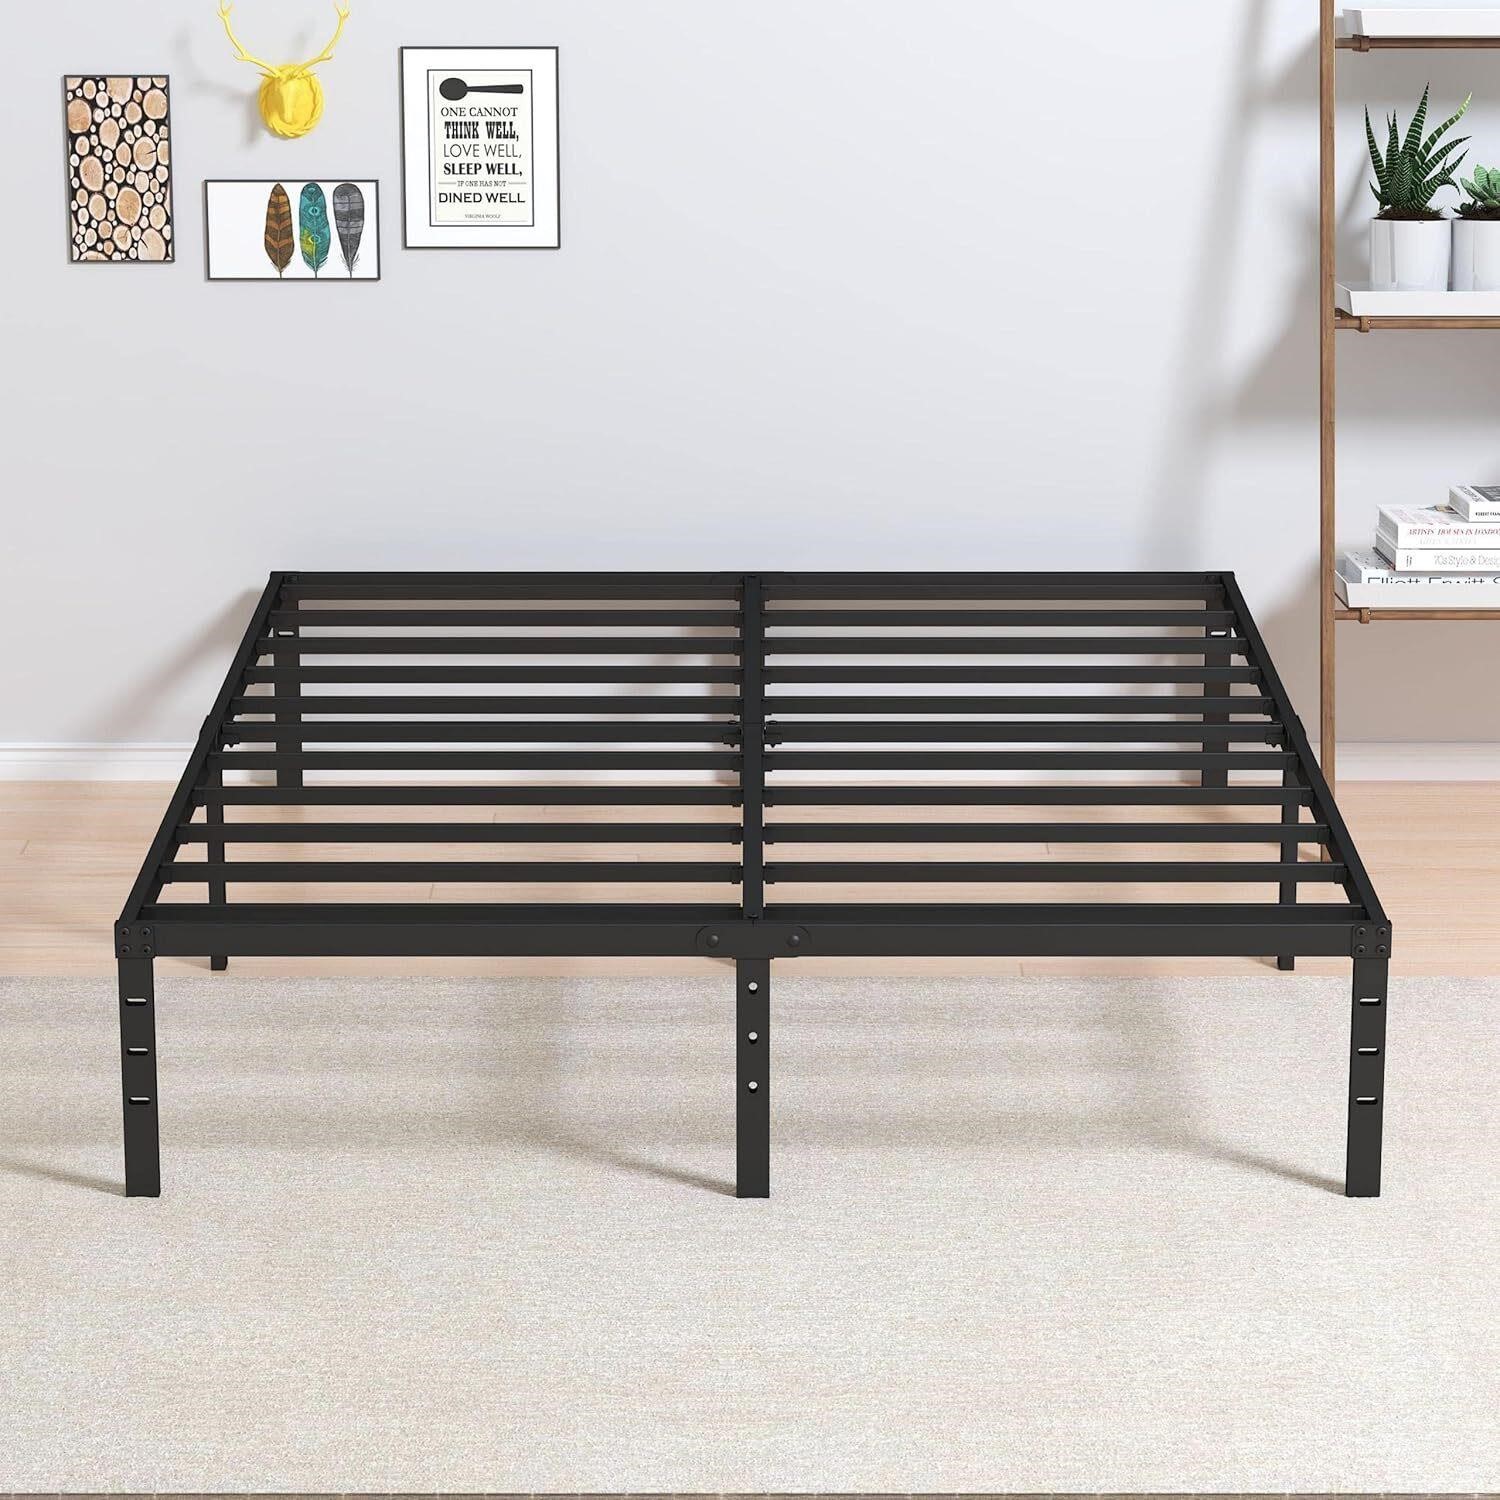 Maenizi 14 Inch Metal Bed Frame Queen Size